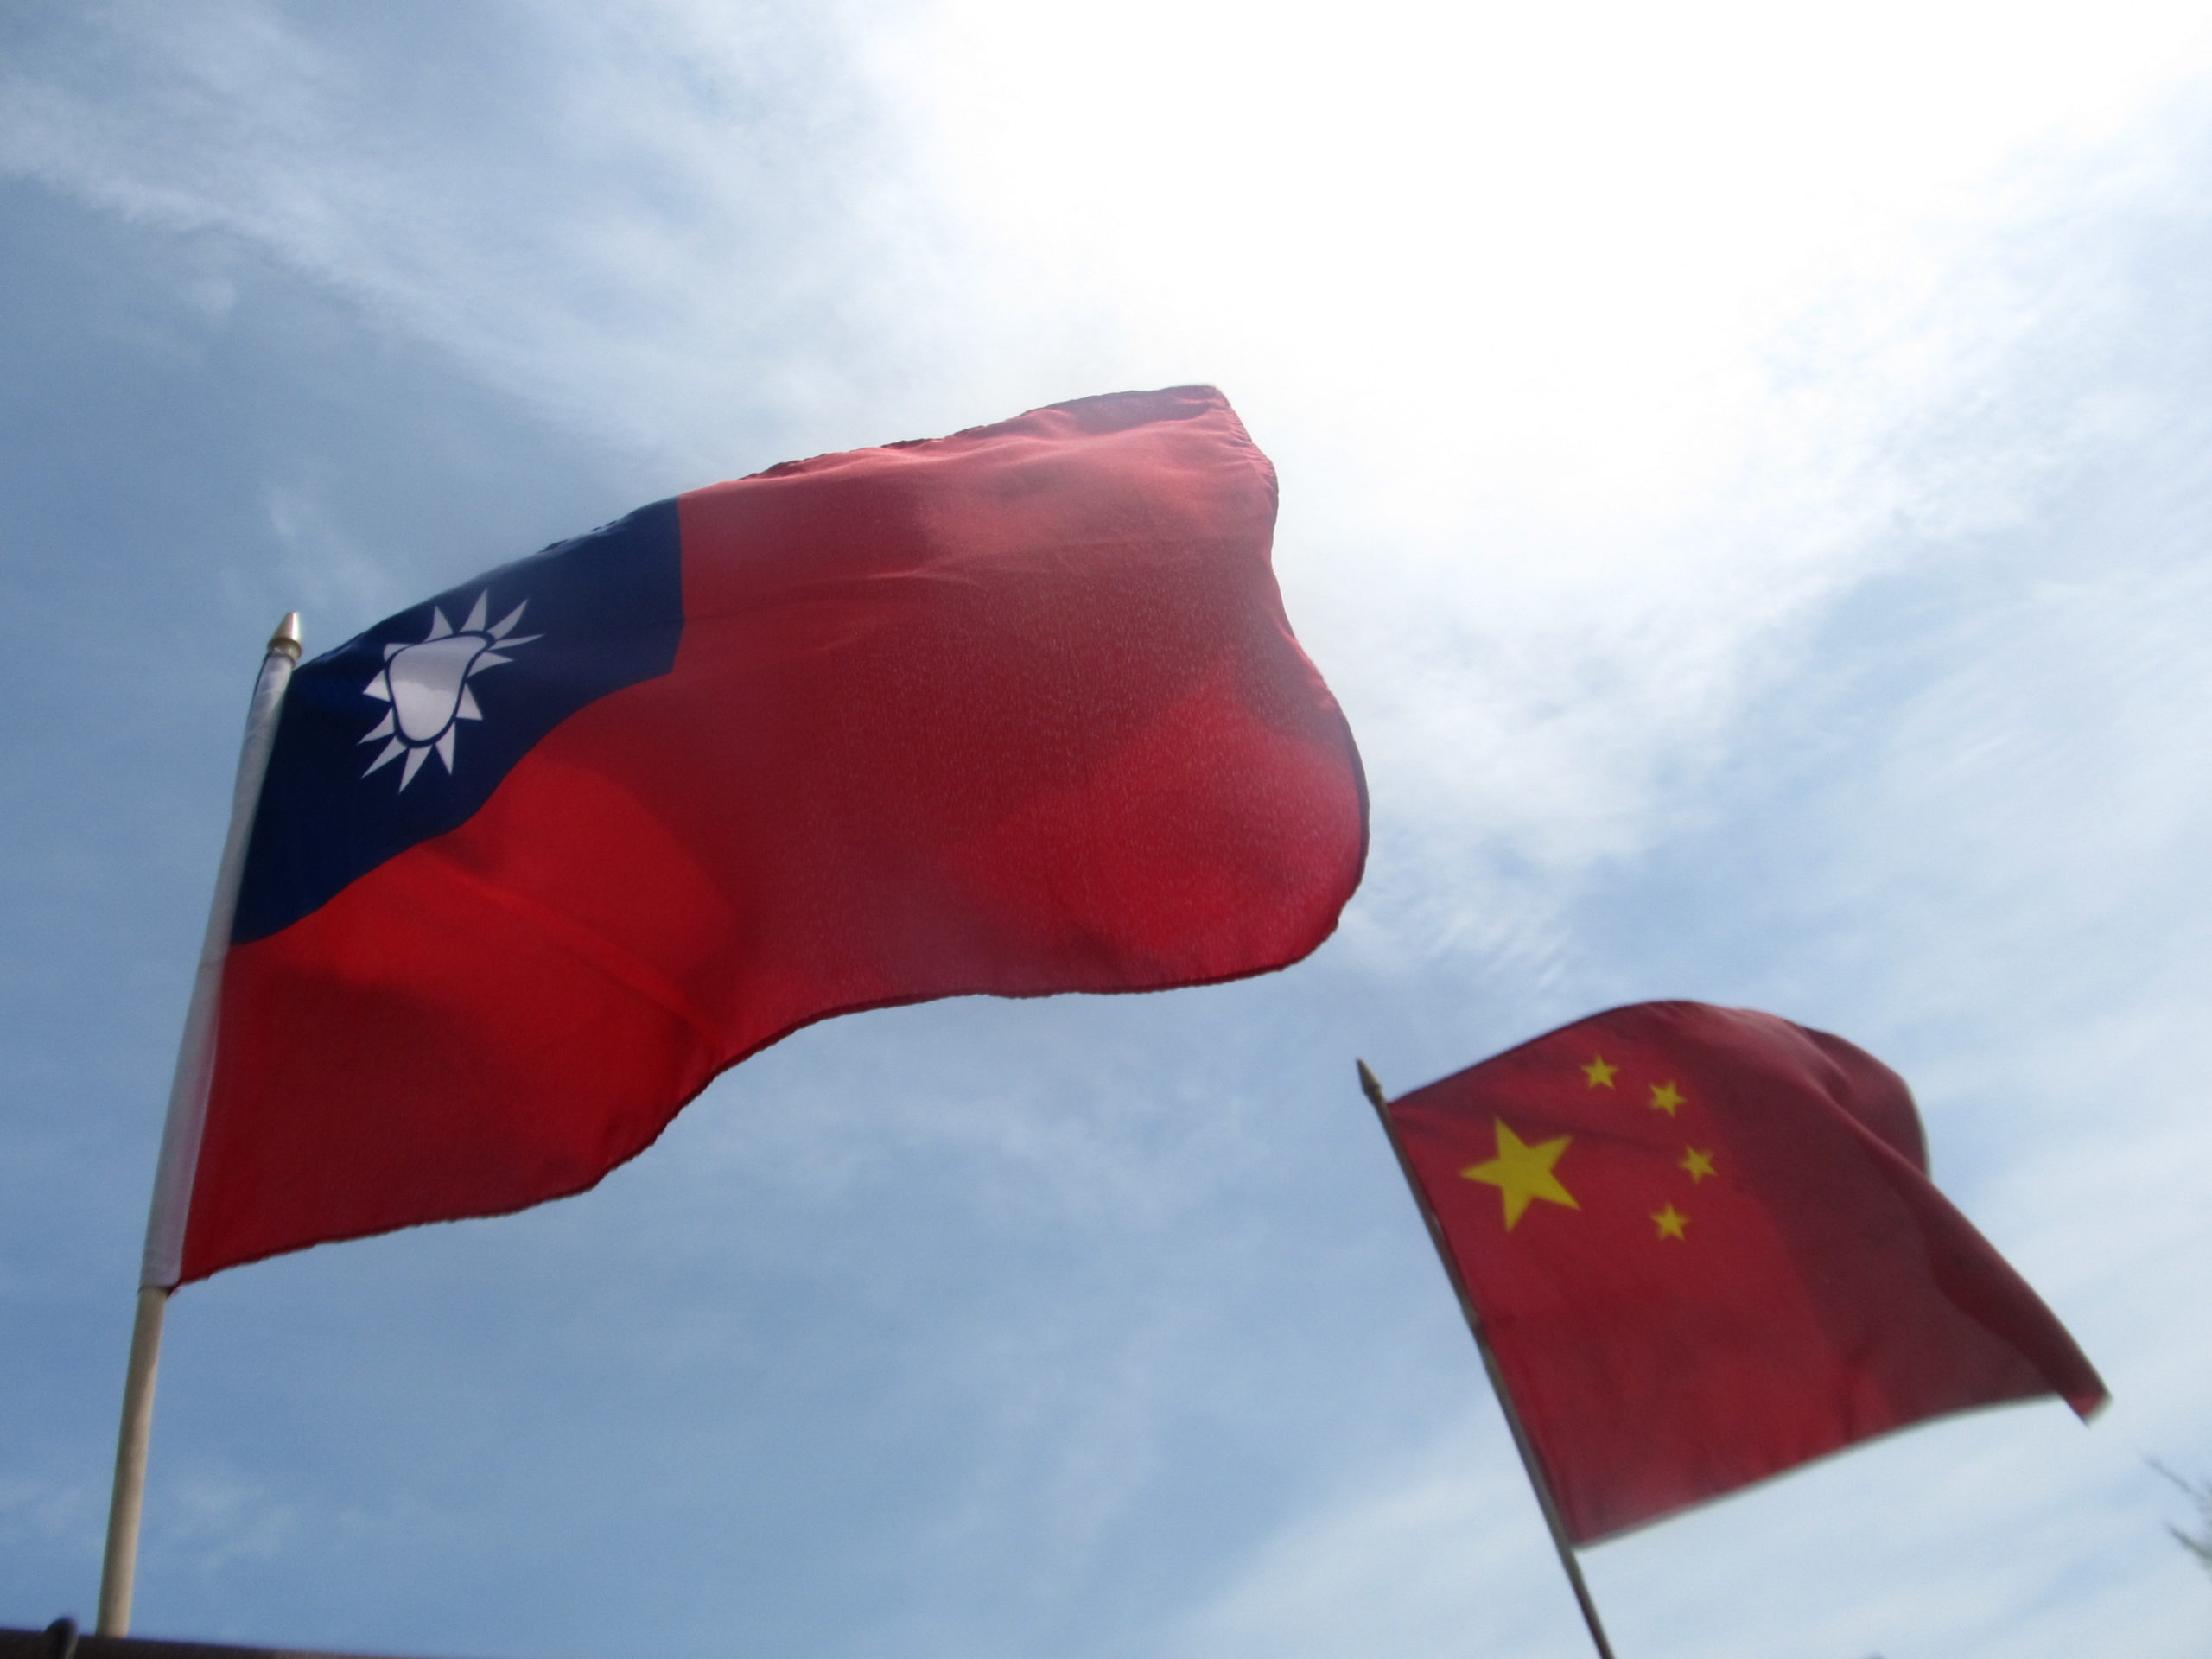 Taiwan Strait Crisis: Implications for Europe